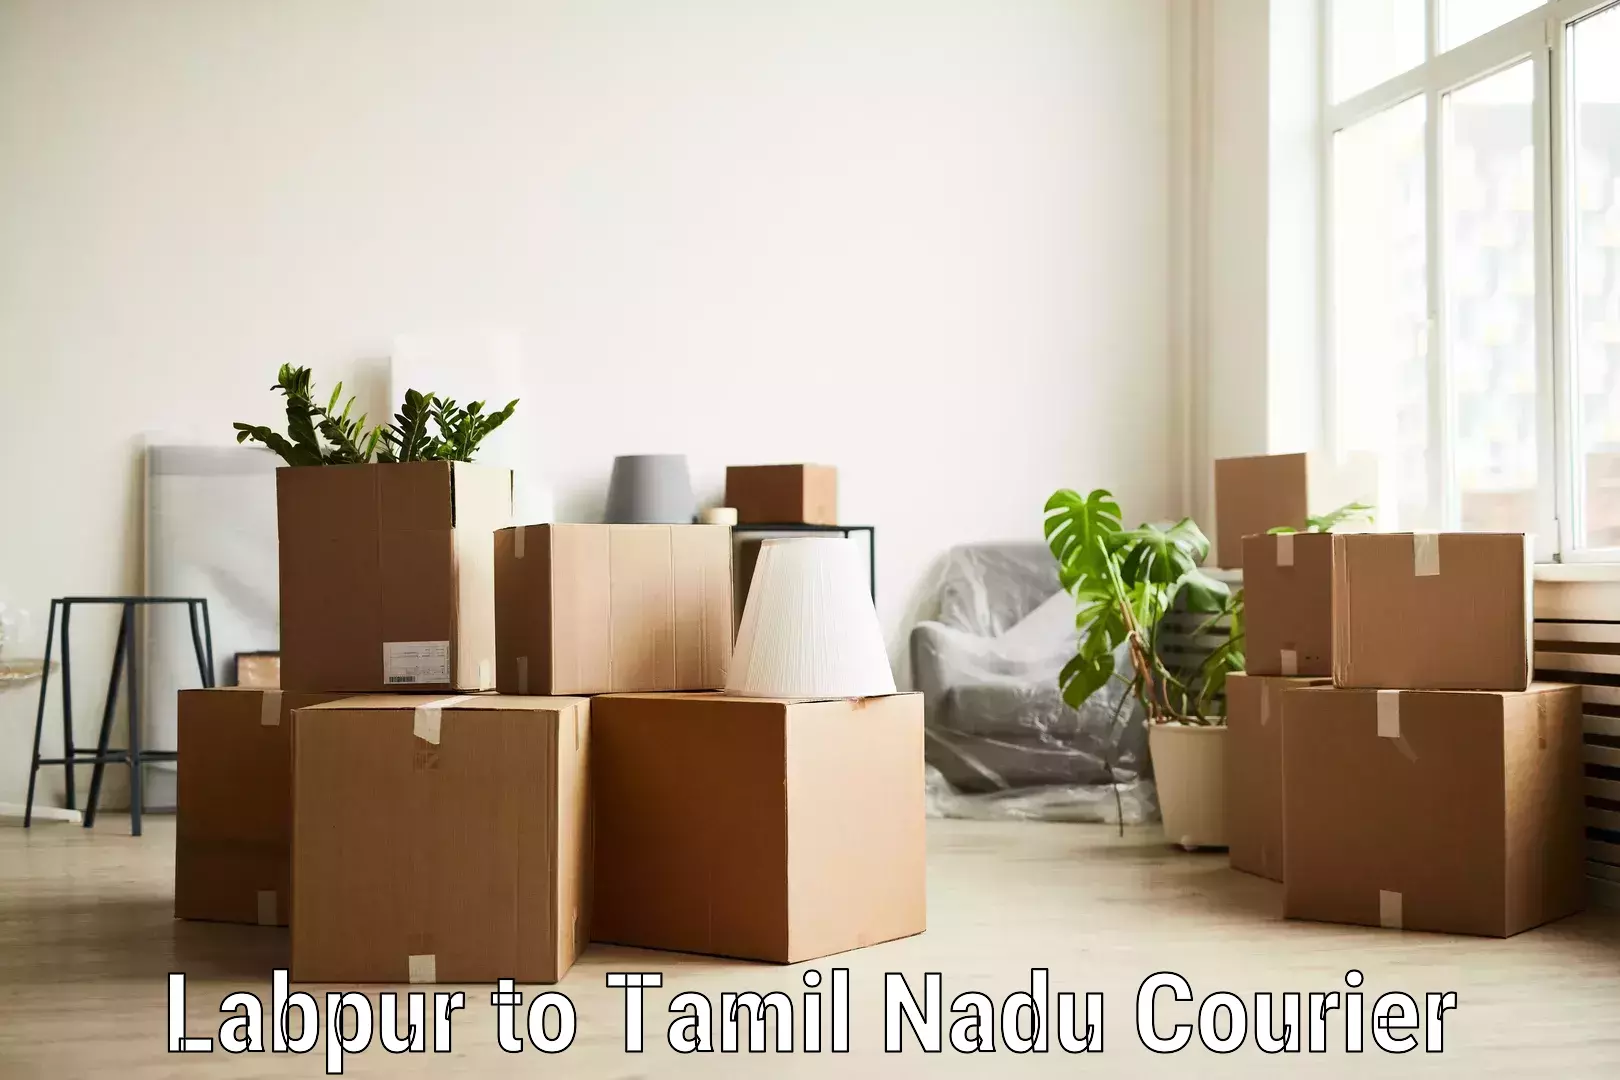 Reliable delivery network Labpur to Nandambakkam